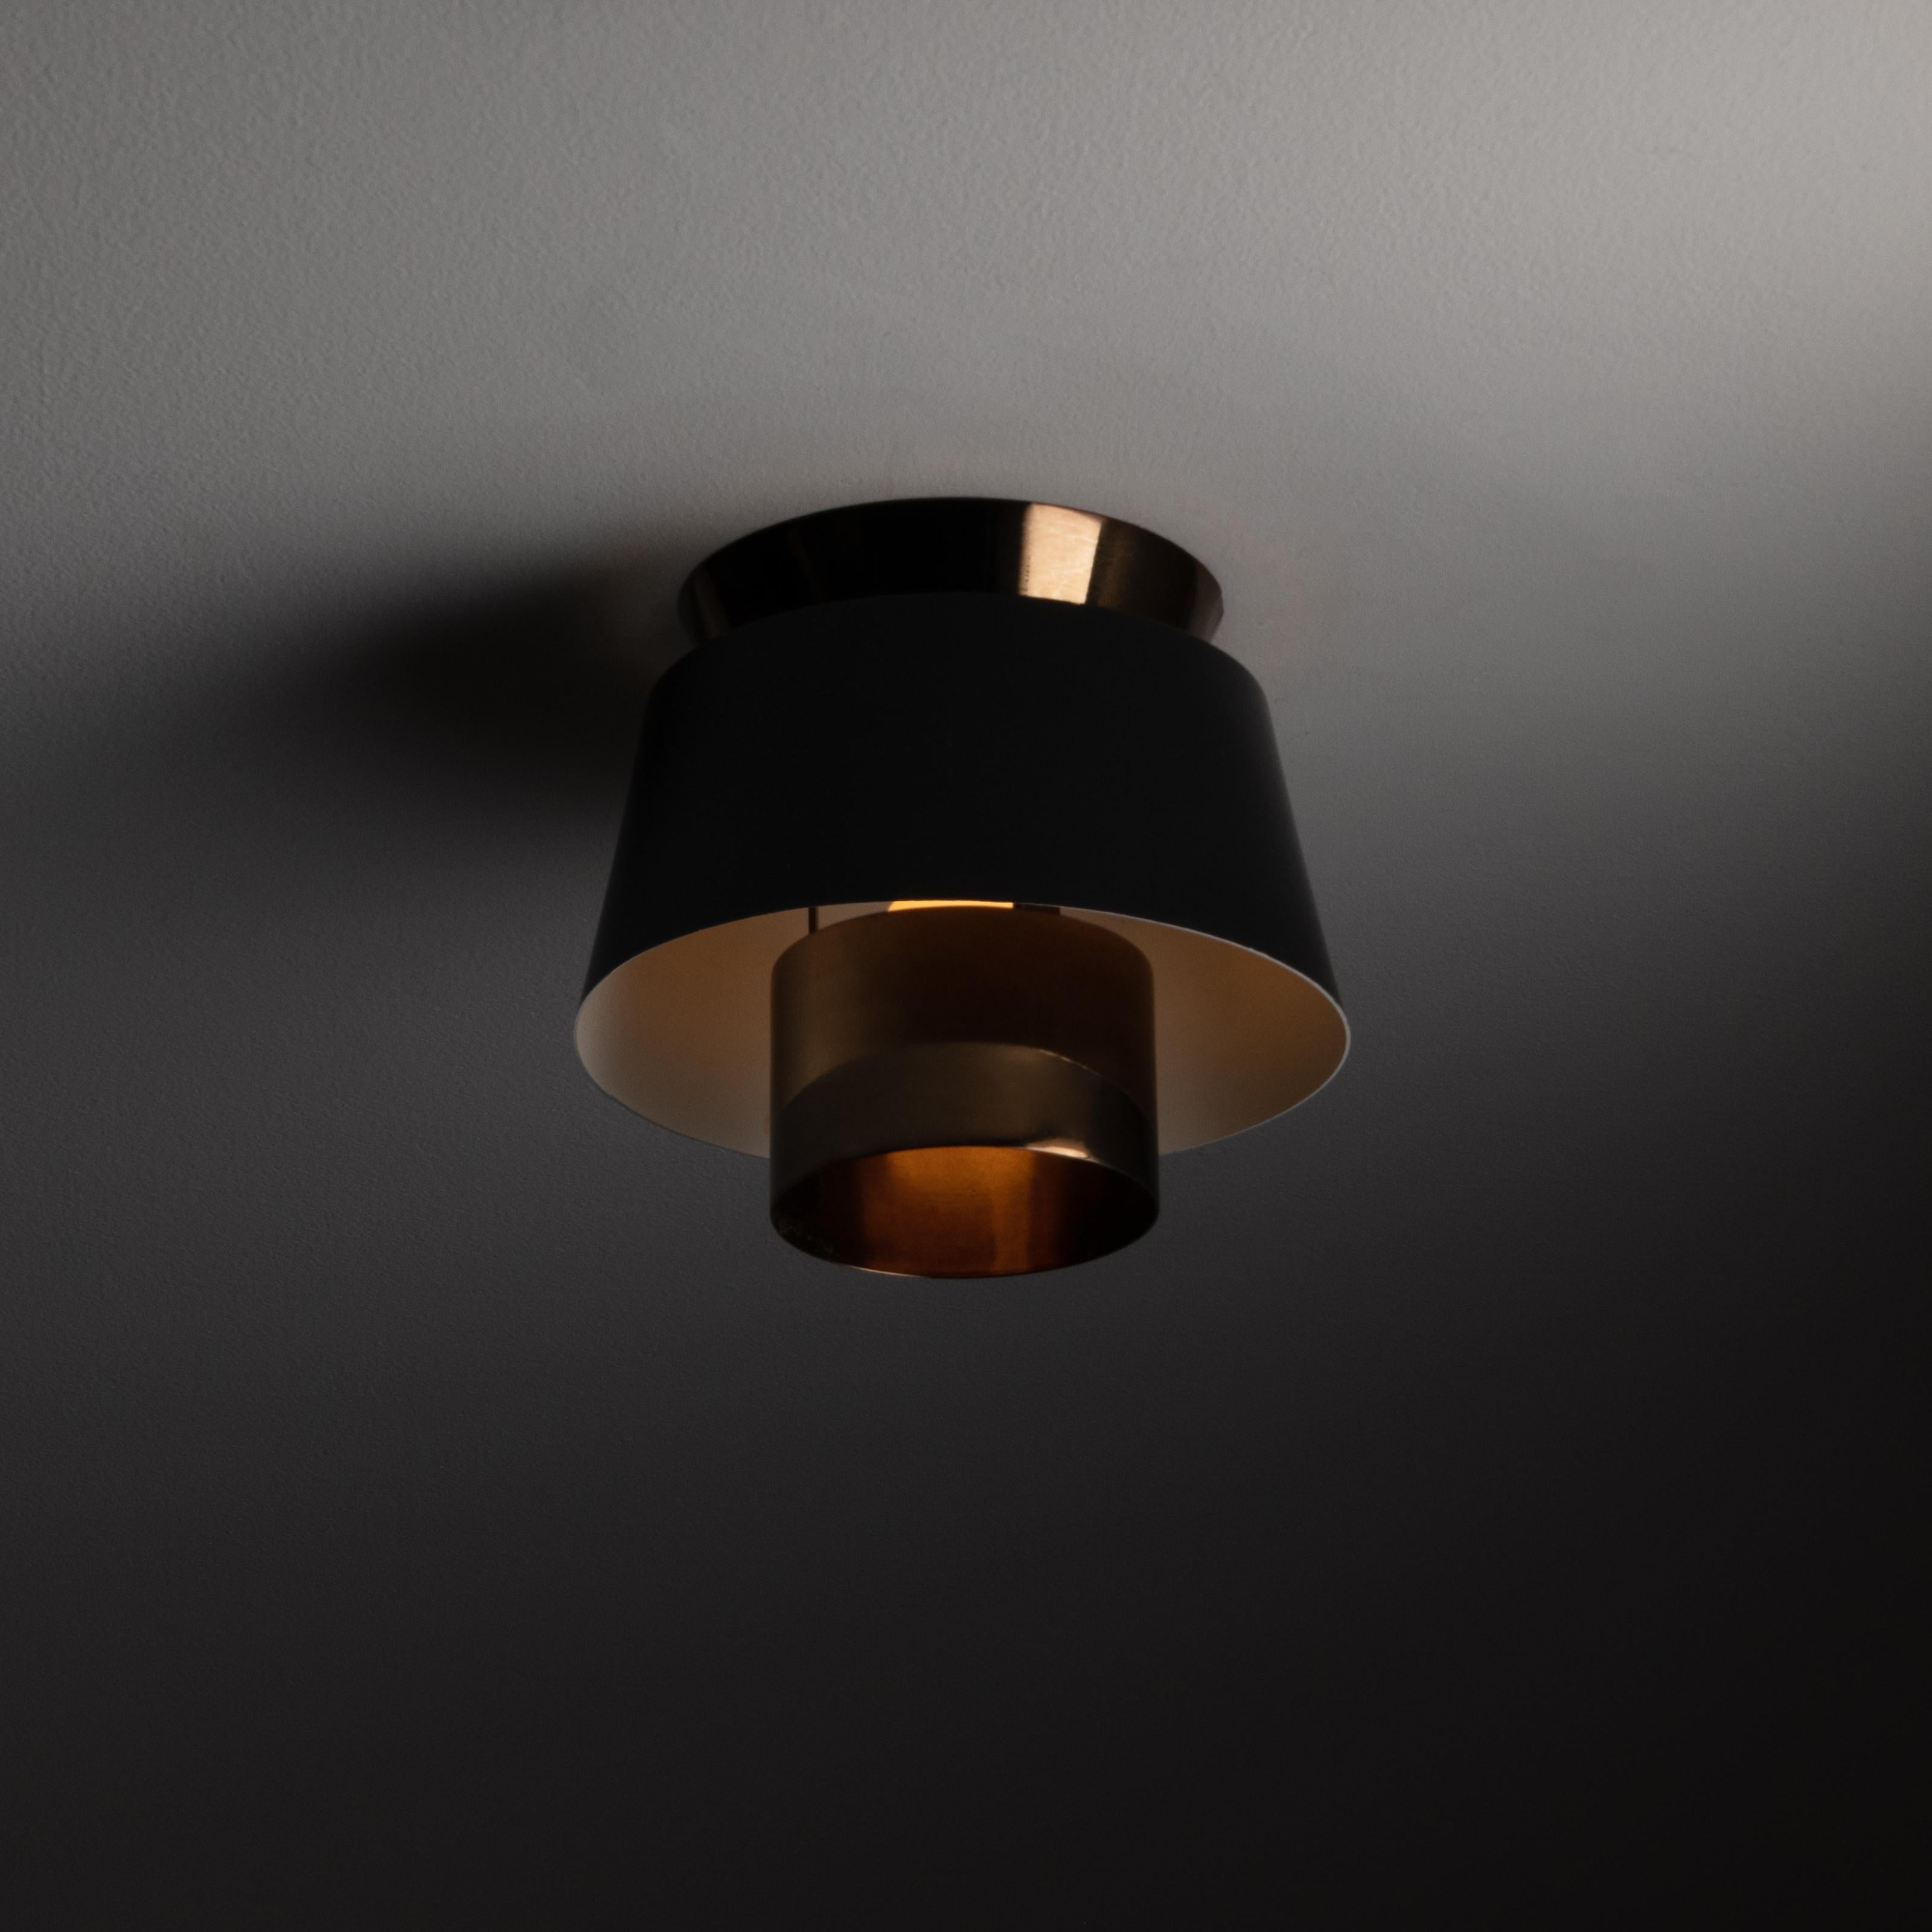 Tivoli flush mounts by Jørn Utzon for Nordisk Solar. Designed and manufactured in, circa 1940s. Black lacquered finish on exterior shell of shade, with internal brass features. Brass has been polished and has very nice patination since years